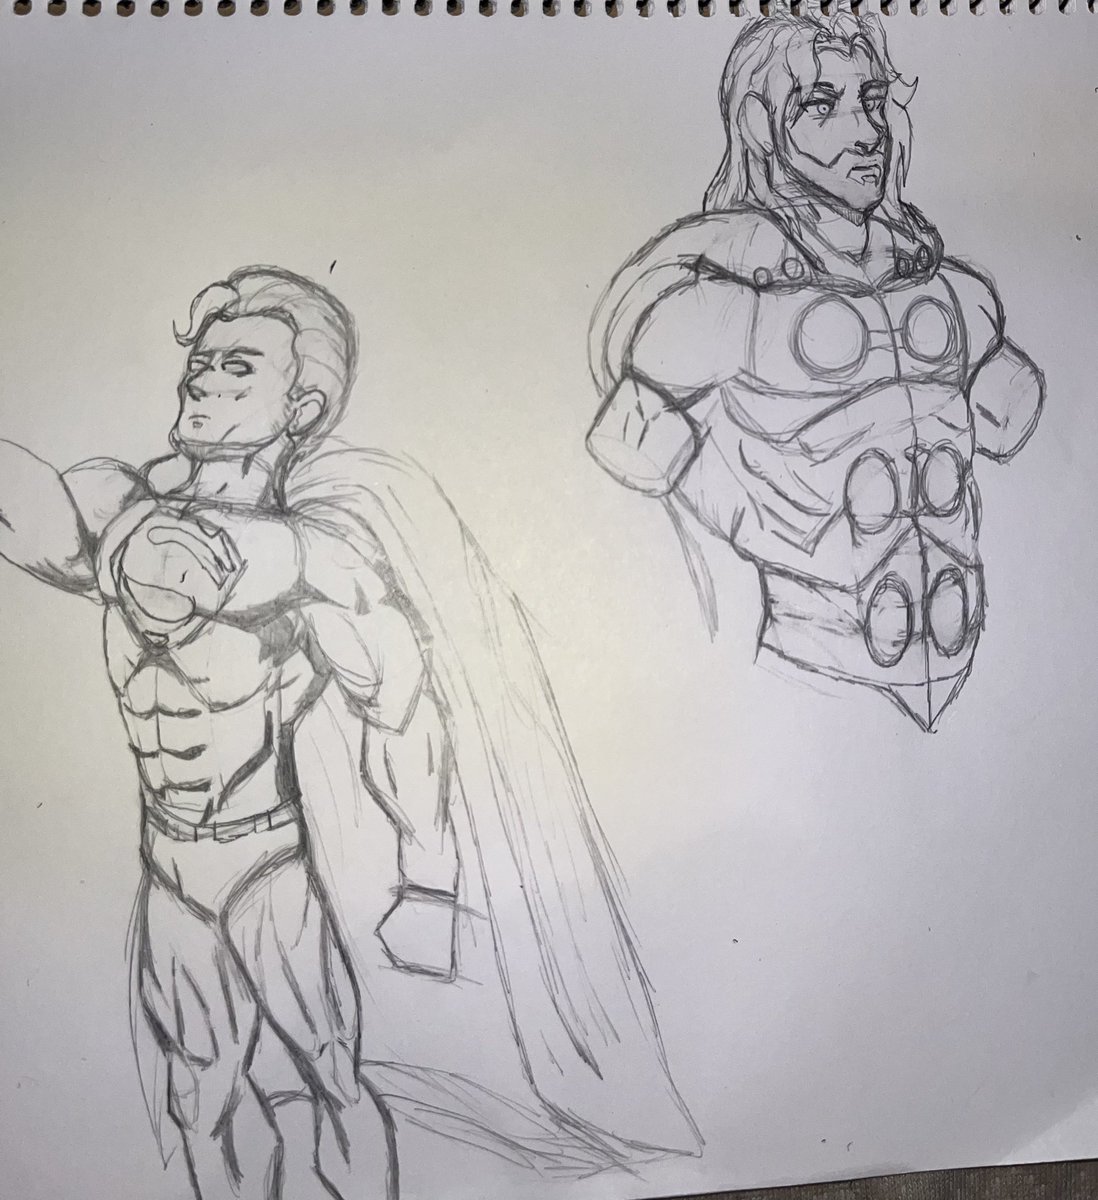 Practiced with shapes and torso sketches once more so. The characters involved are Superman and Thor, particularly of Ultimate Marvel. https://t.co/ZwSNnZLMoF